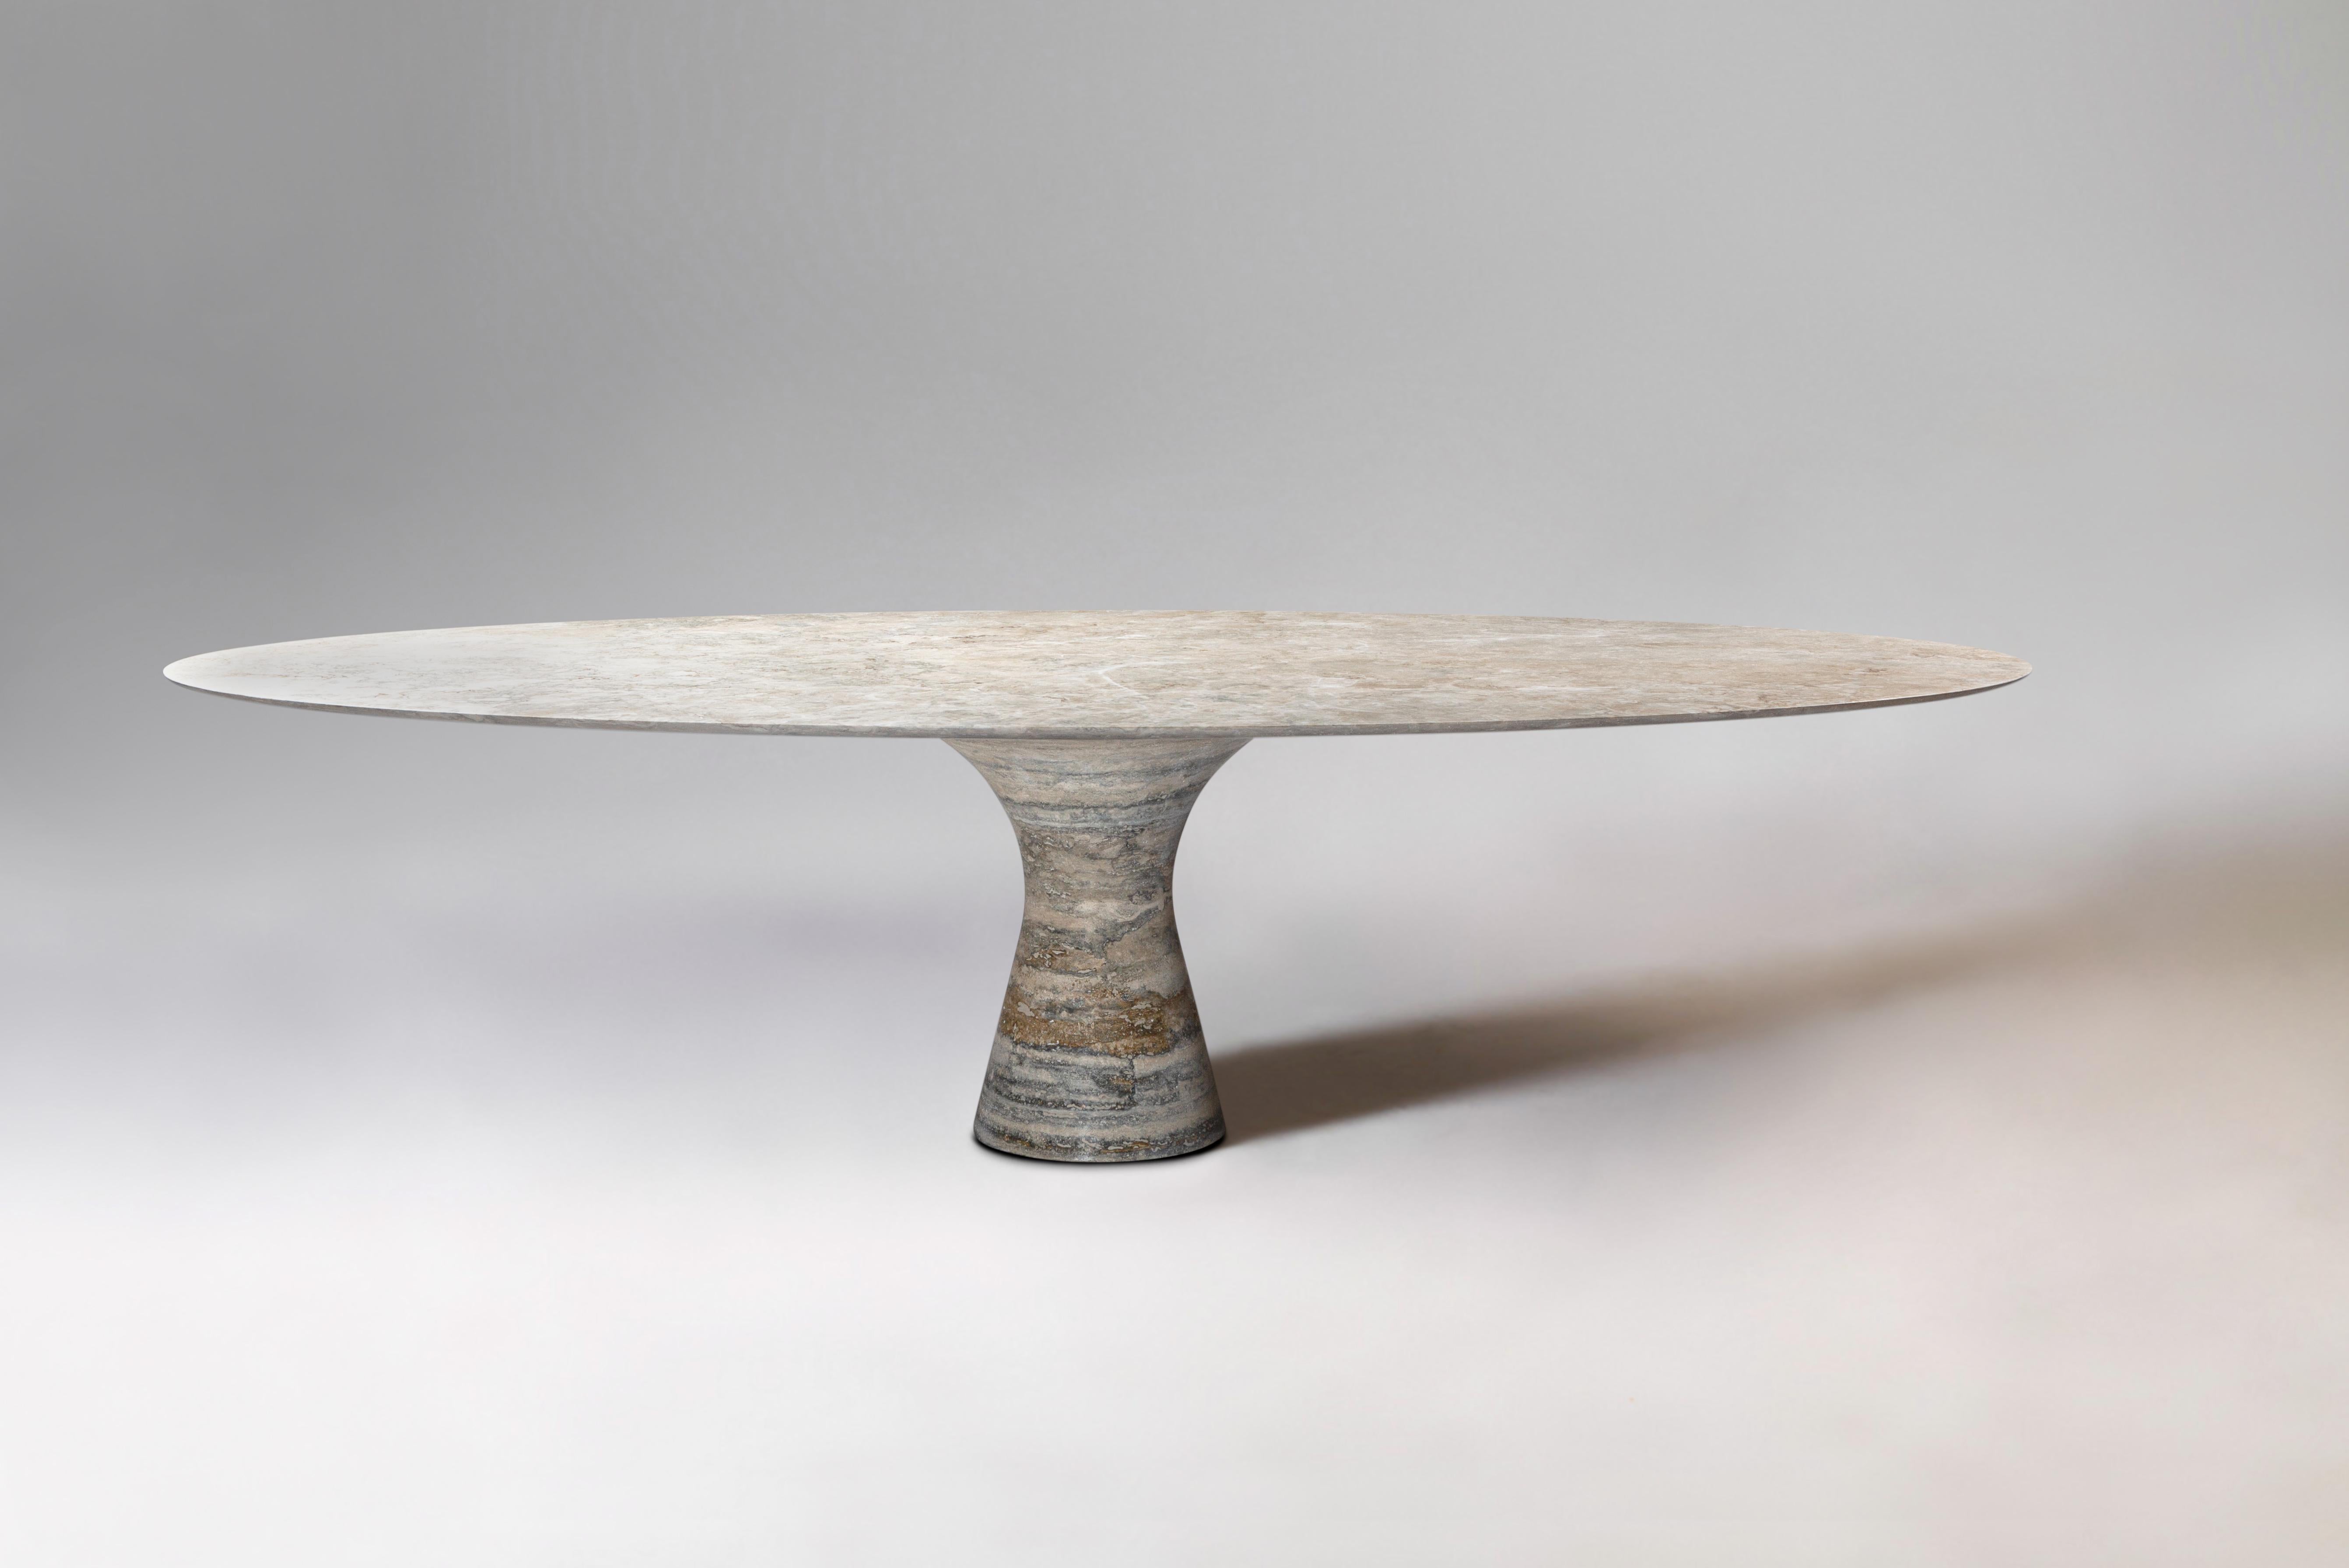 Travertino Silver Refined Contemporary Marble Dining Table 160/75

Angelo is the essence of a round table in natural stone, a sculptural shape in robust material with elegant lines and refined finishes.

The collection consists of a round/oval